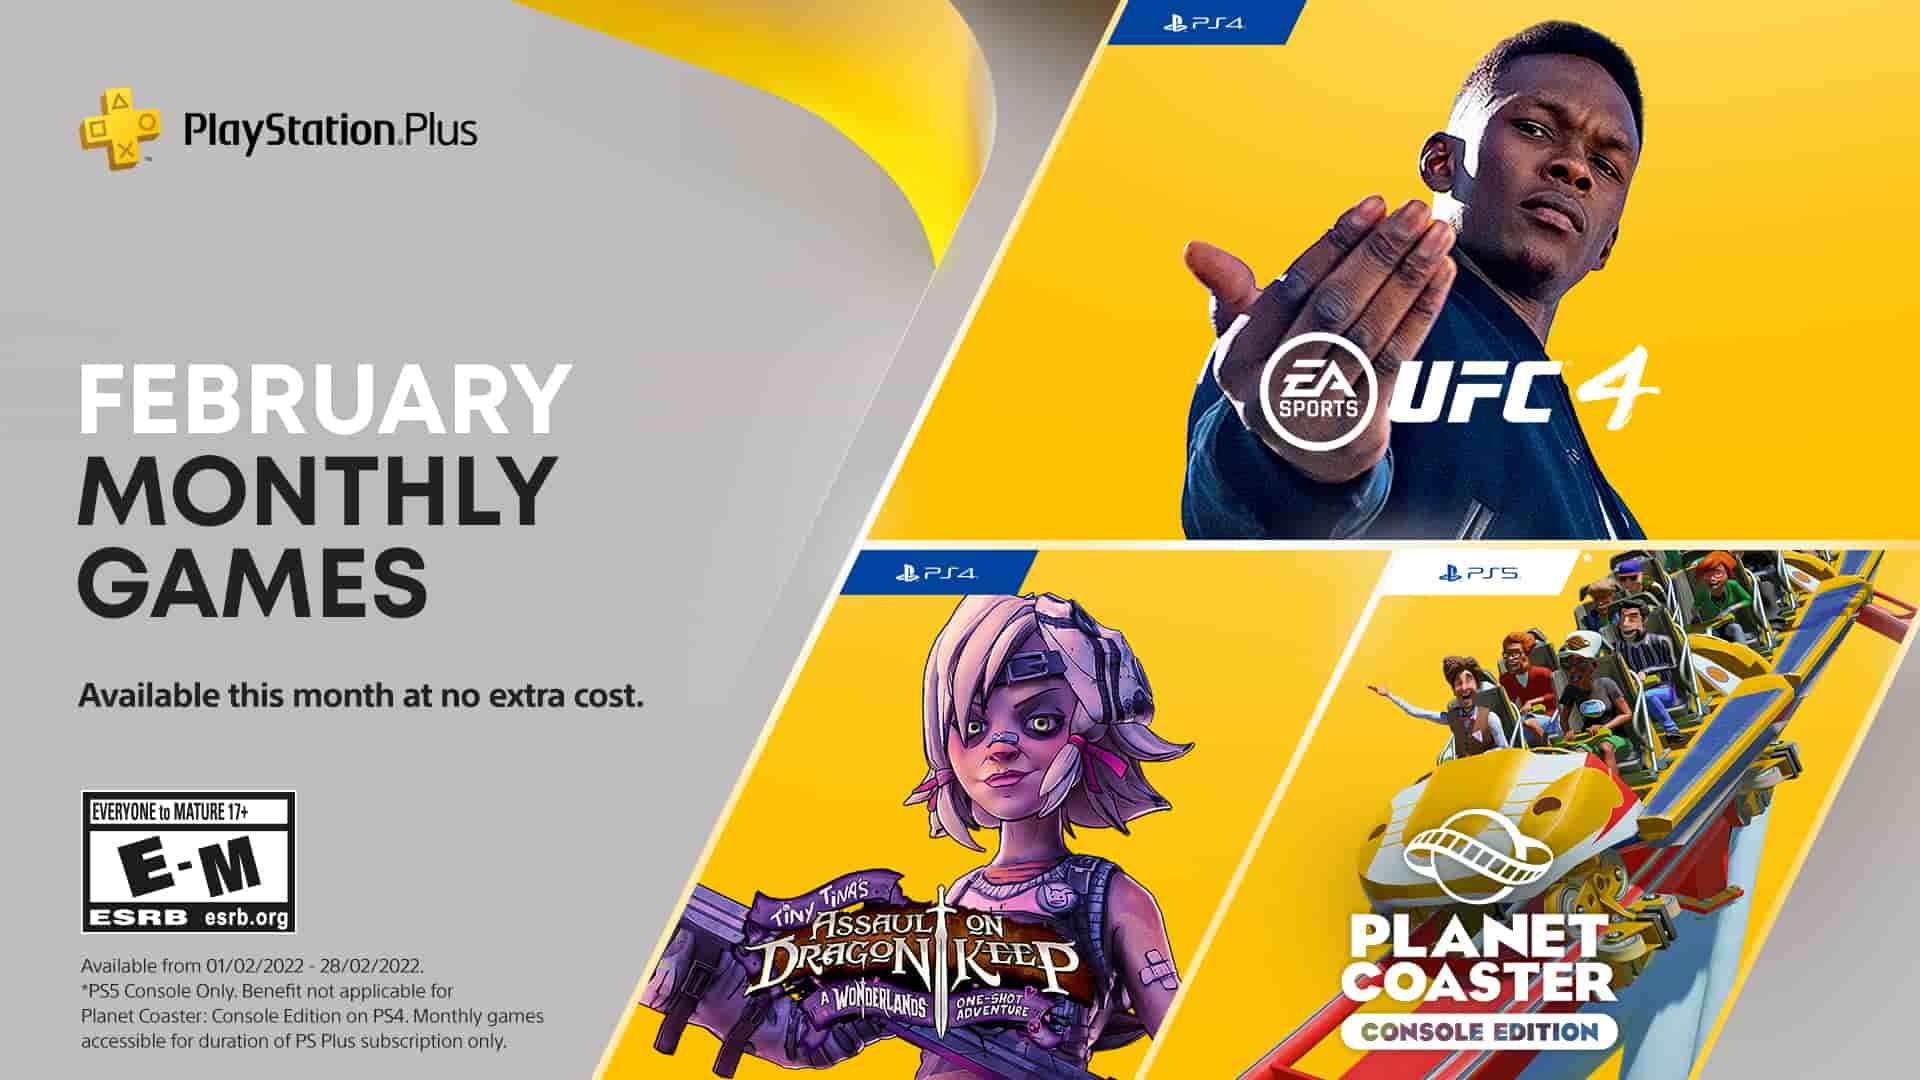 PS5 PS4 Free Multiplayer Weekend February 2022 - PlayStation LifeStyle